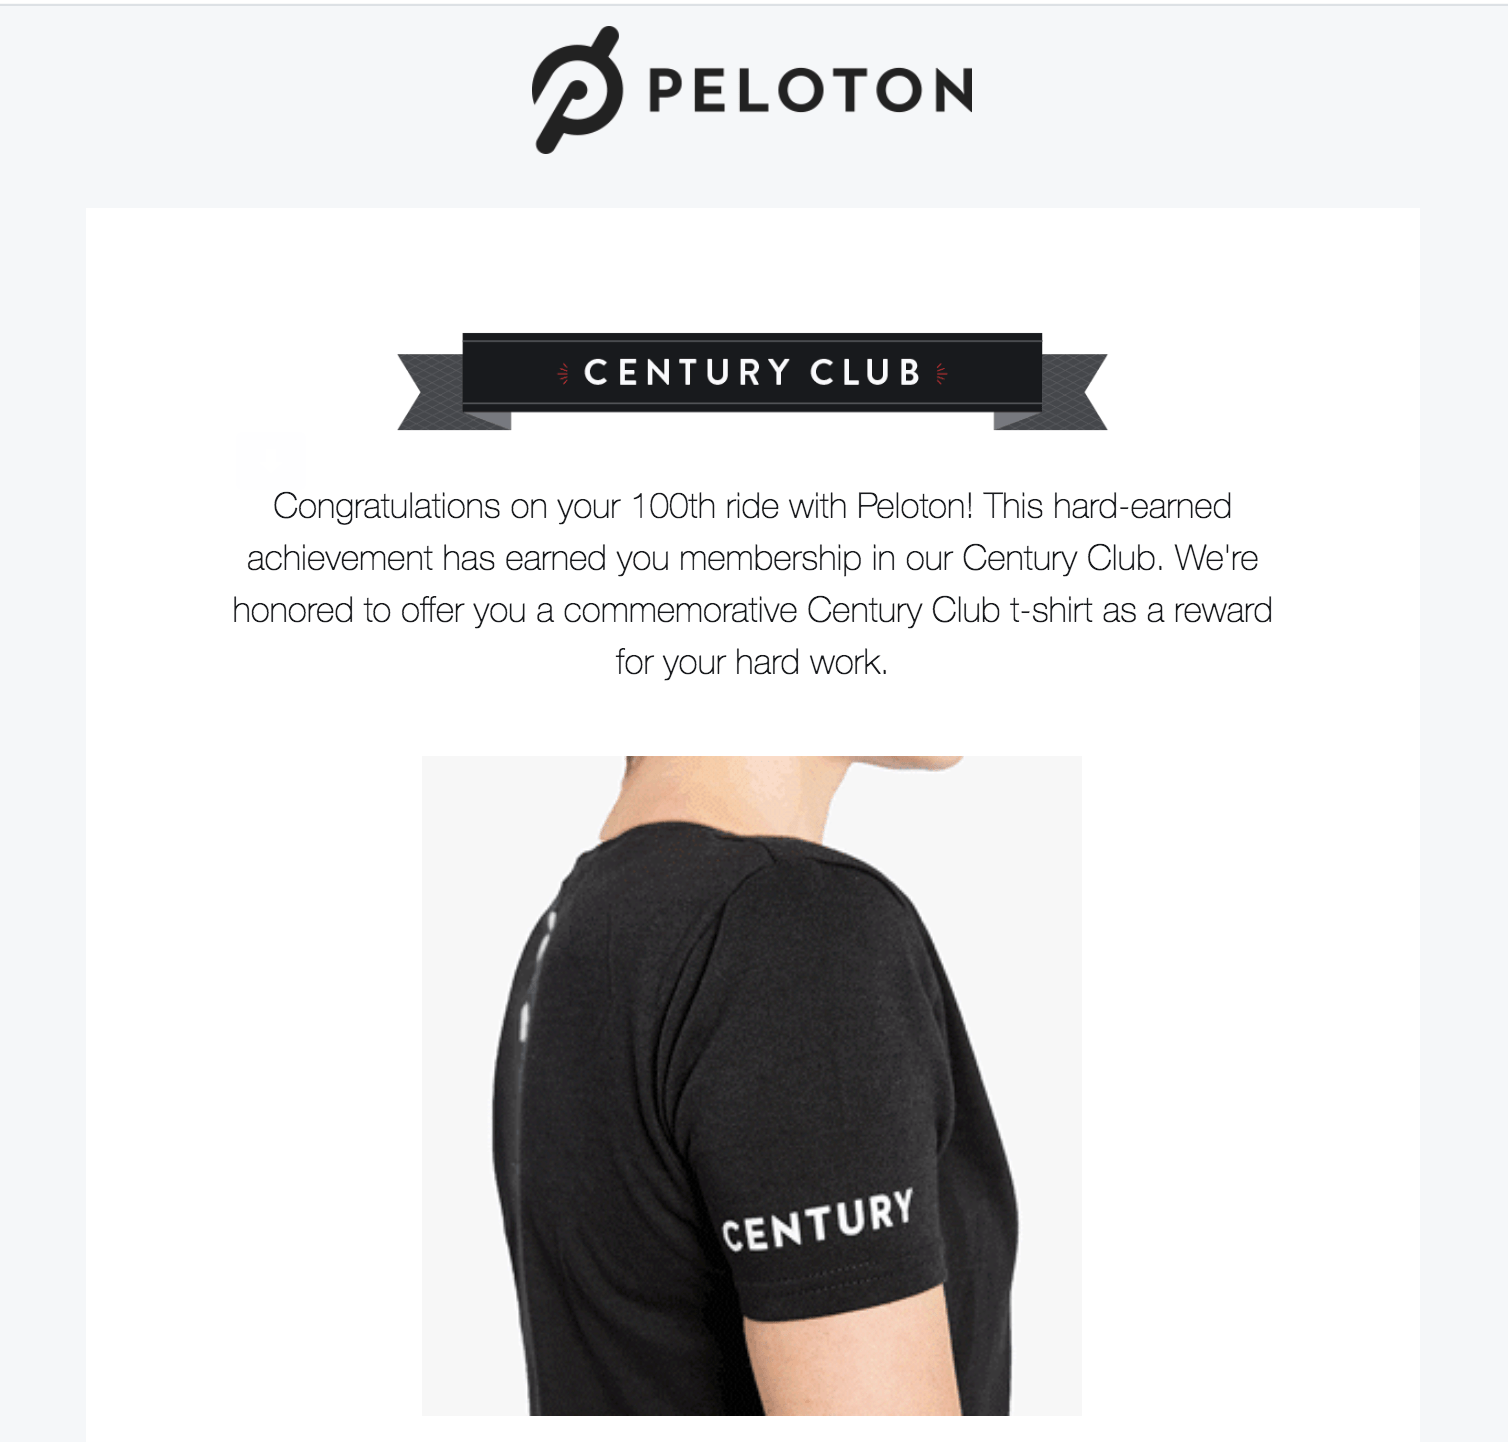 peloton's customer swag campaign email